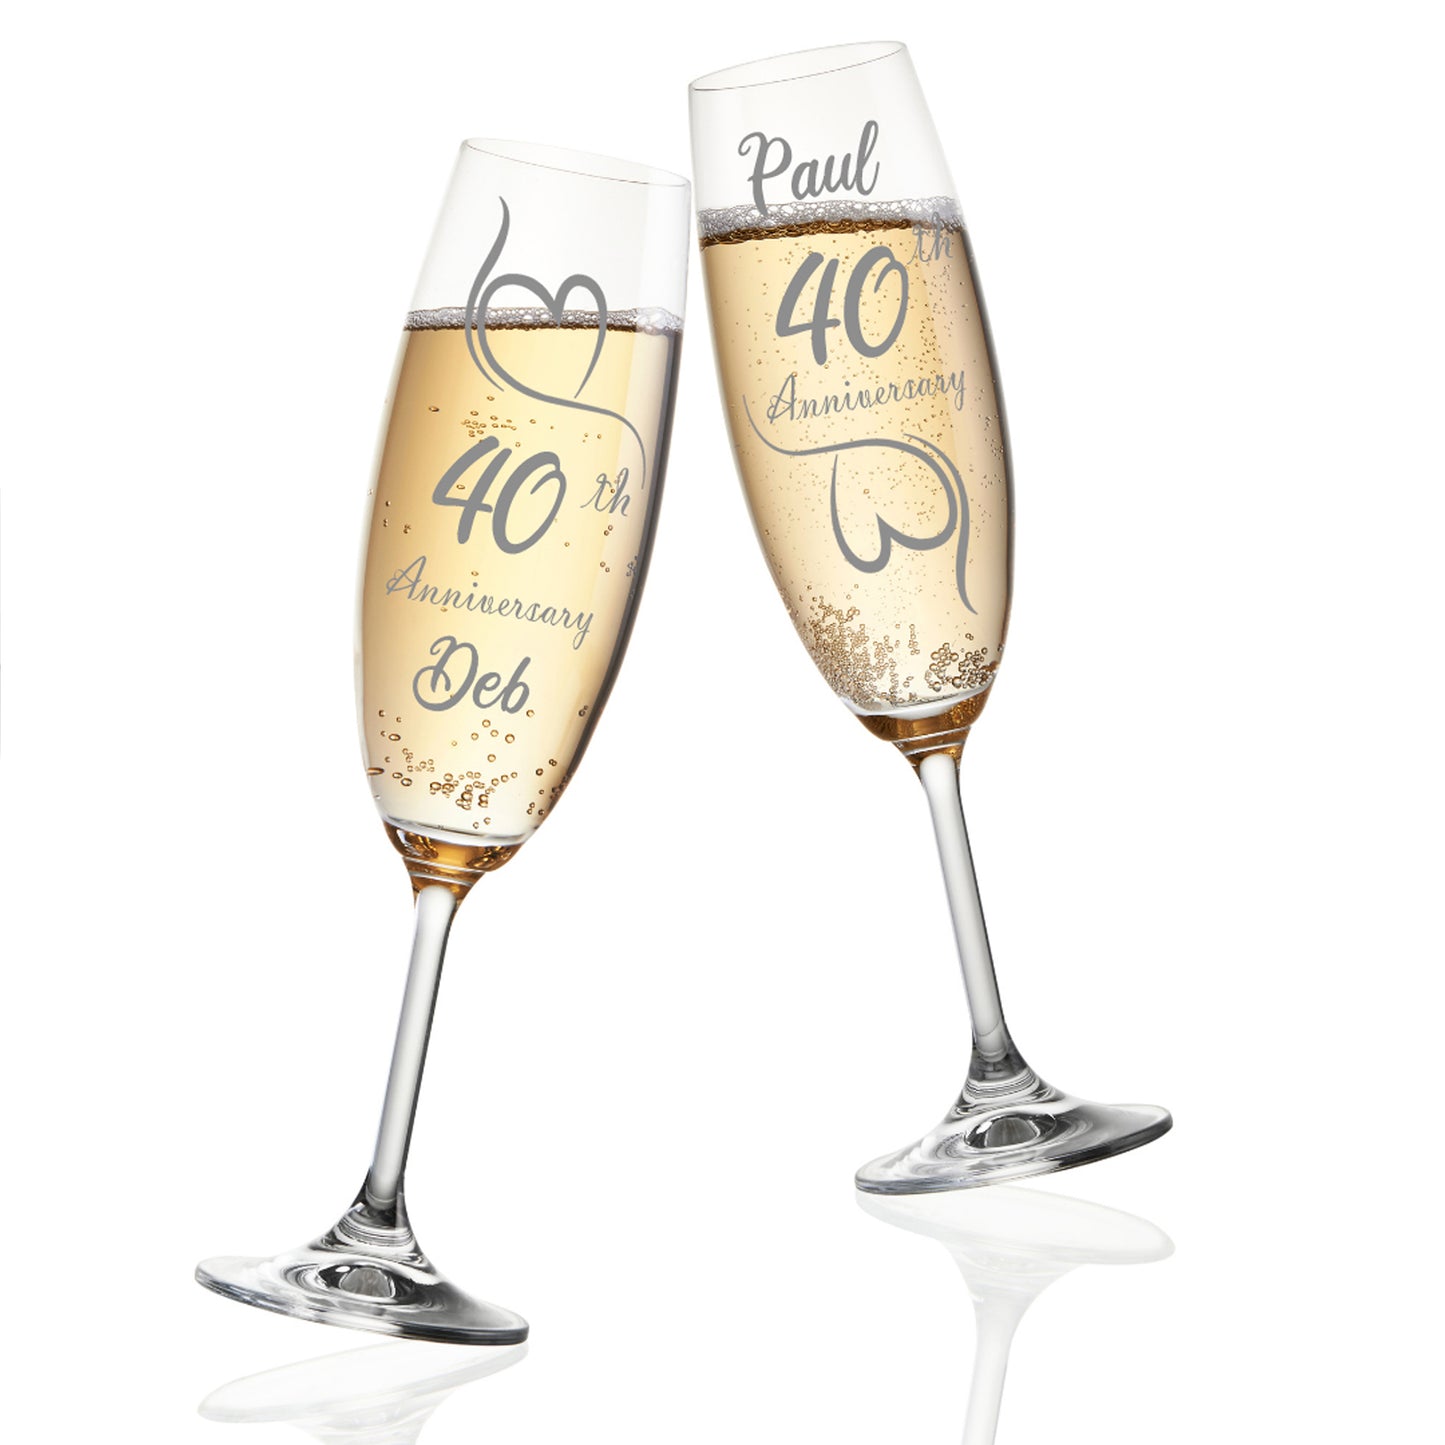 Engraved 40th Ruby Wedding Anniversary Personalised Engraved Champagne Glass Gift Set  - Always Looking Good -   